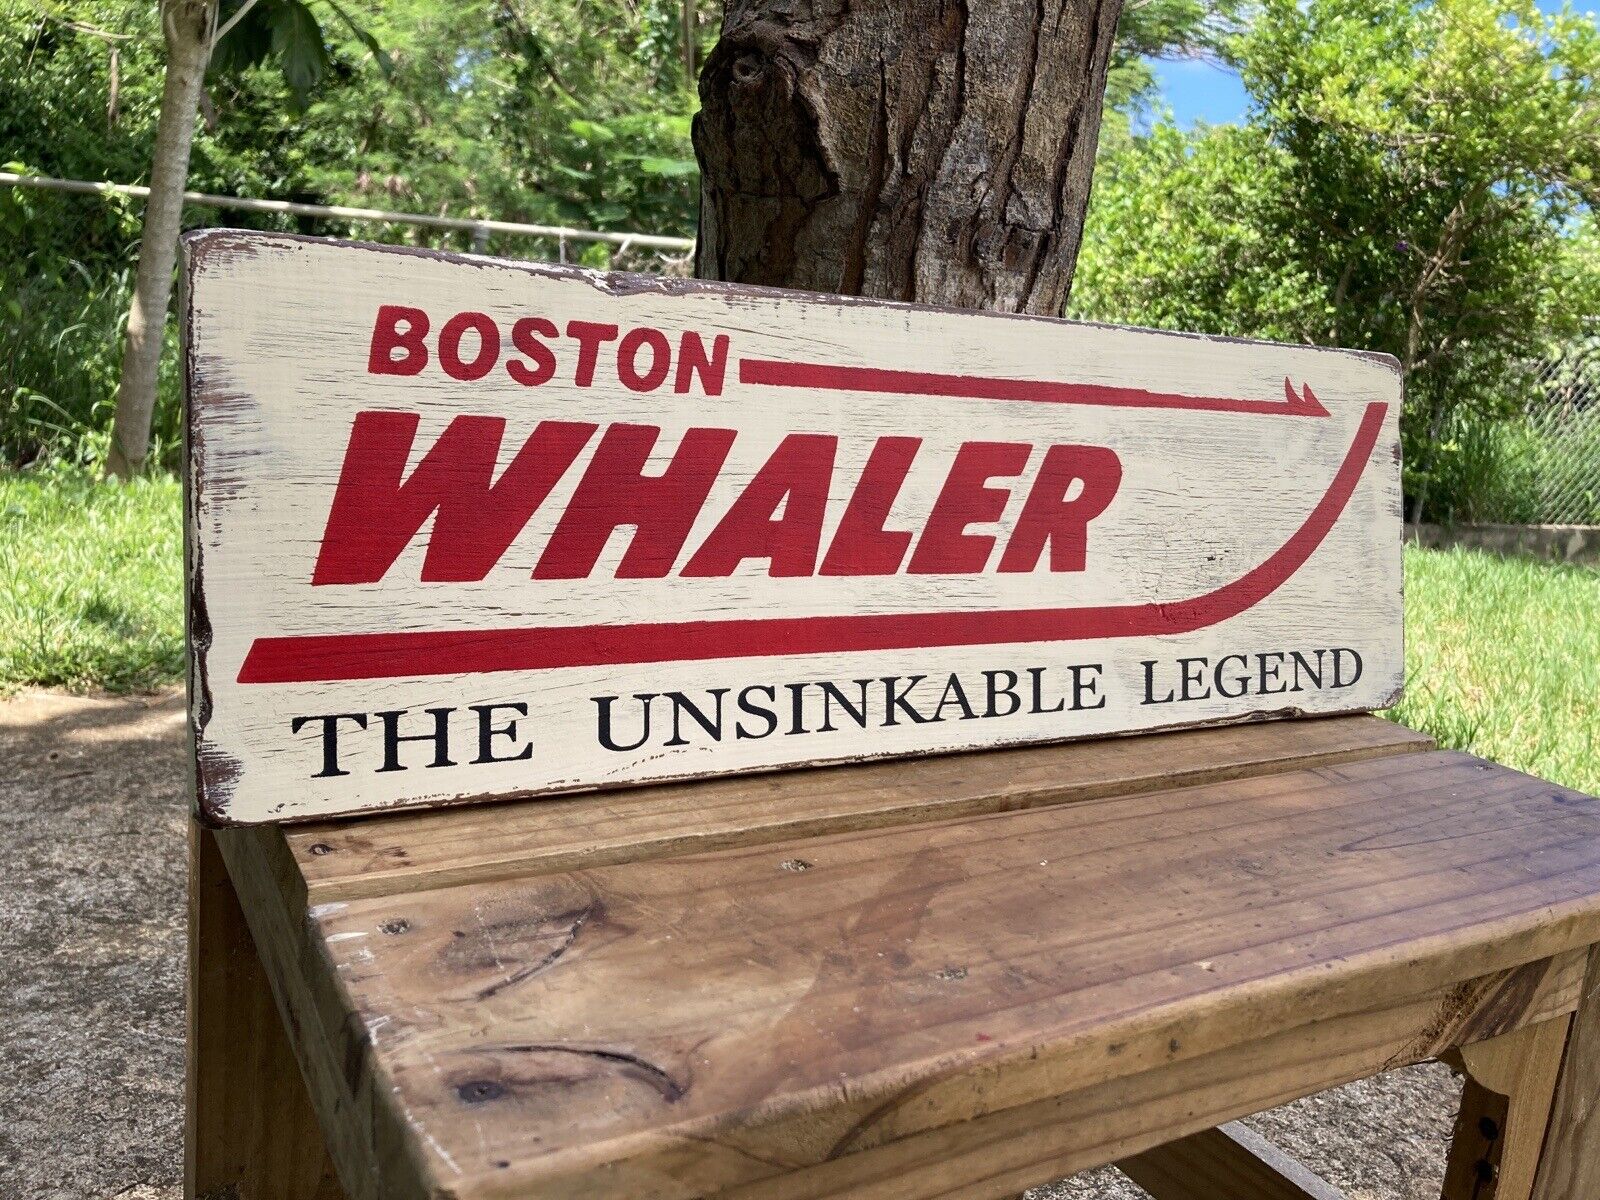 Boston Whaler Wood Sign Nautical Distressed Vintage Antique Look